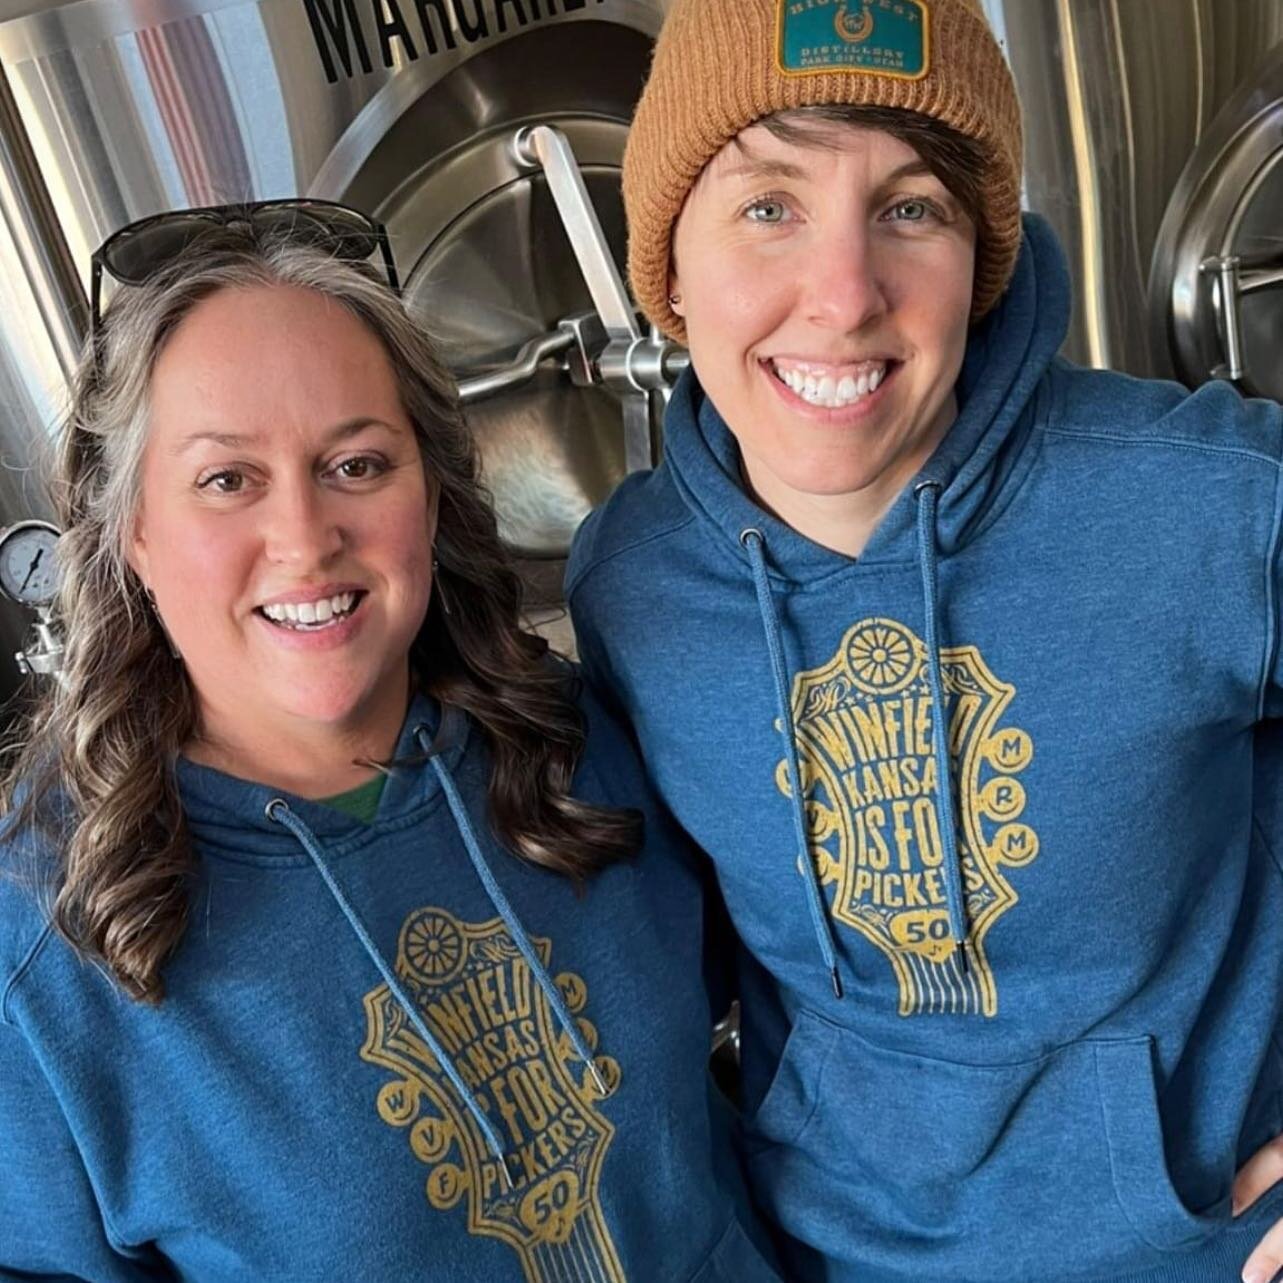 Halfway to Winfield with the birds! ❤️🦅
&mdash;
So cool seeing our amazing friends rocking our gear and celebrating the upcoming annual #walnutvalleyfestival! 🪕
&mdash;
Make sure to visit @wernercreekfarm and @ladybirdbrewing next time you go. Just